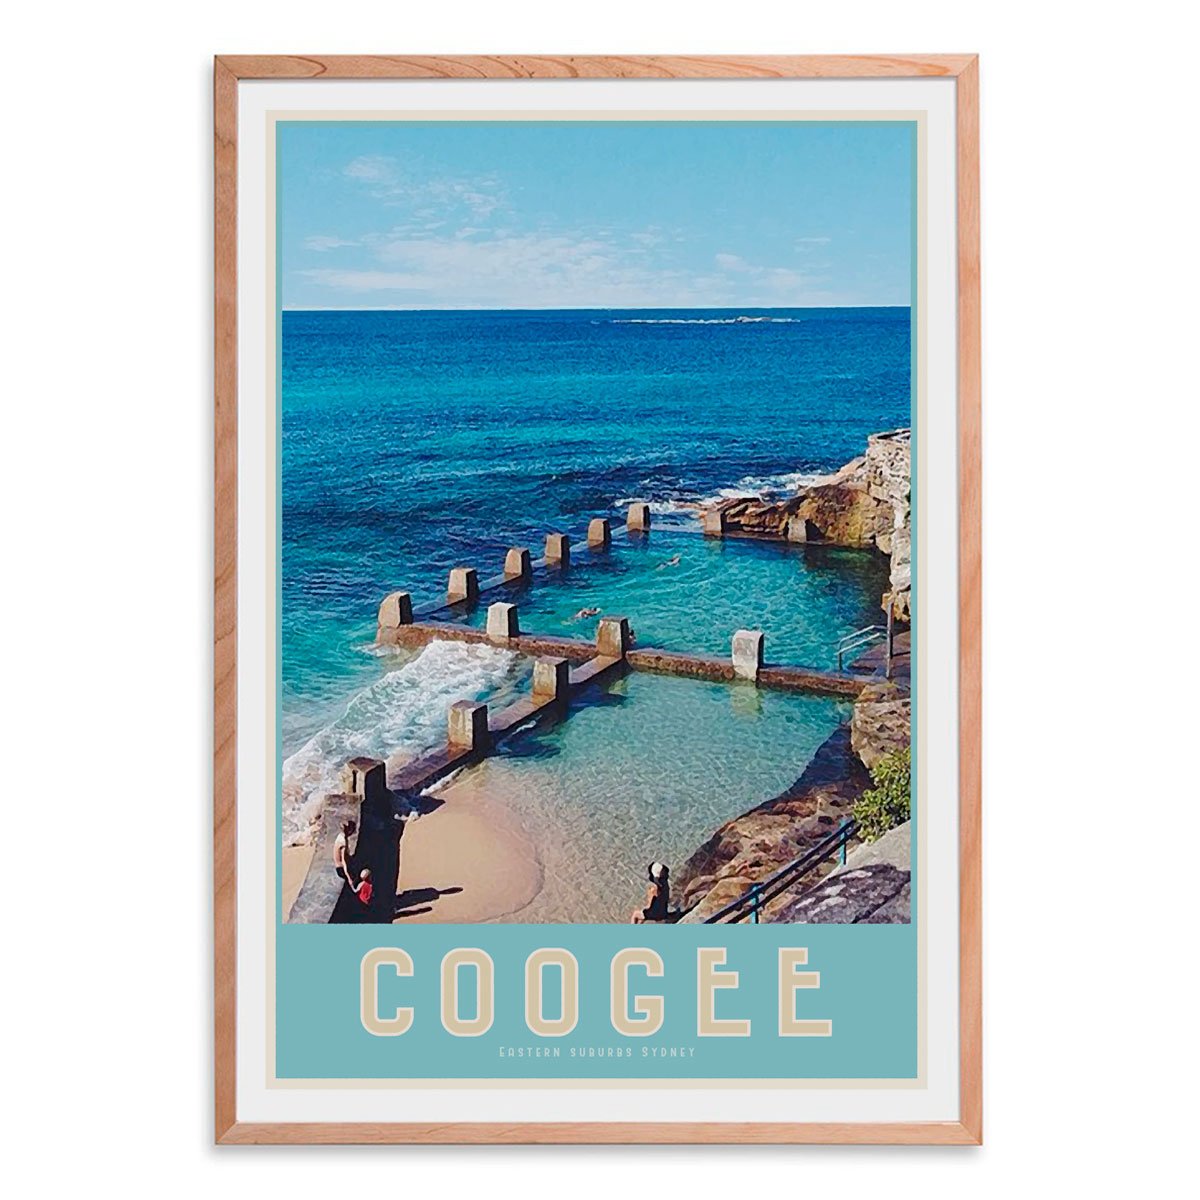 Coogee Pool vintage travel style oak framed prints by places we luv